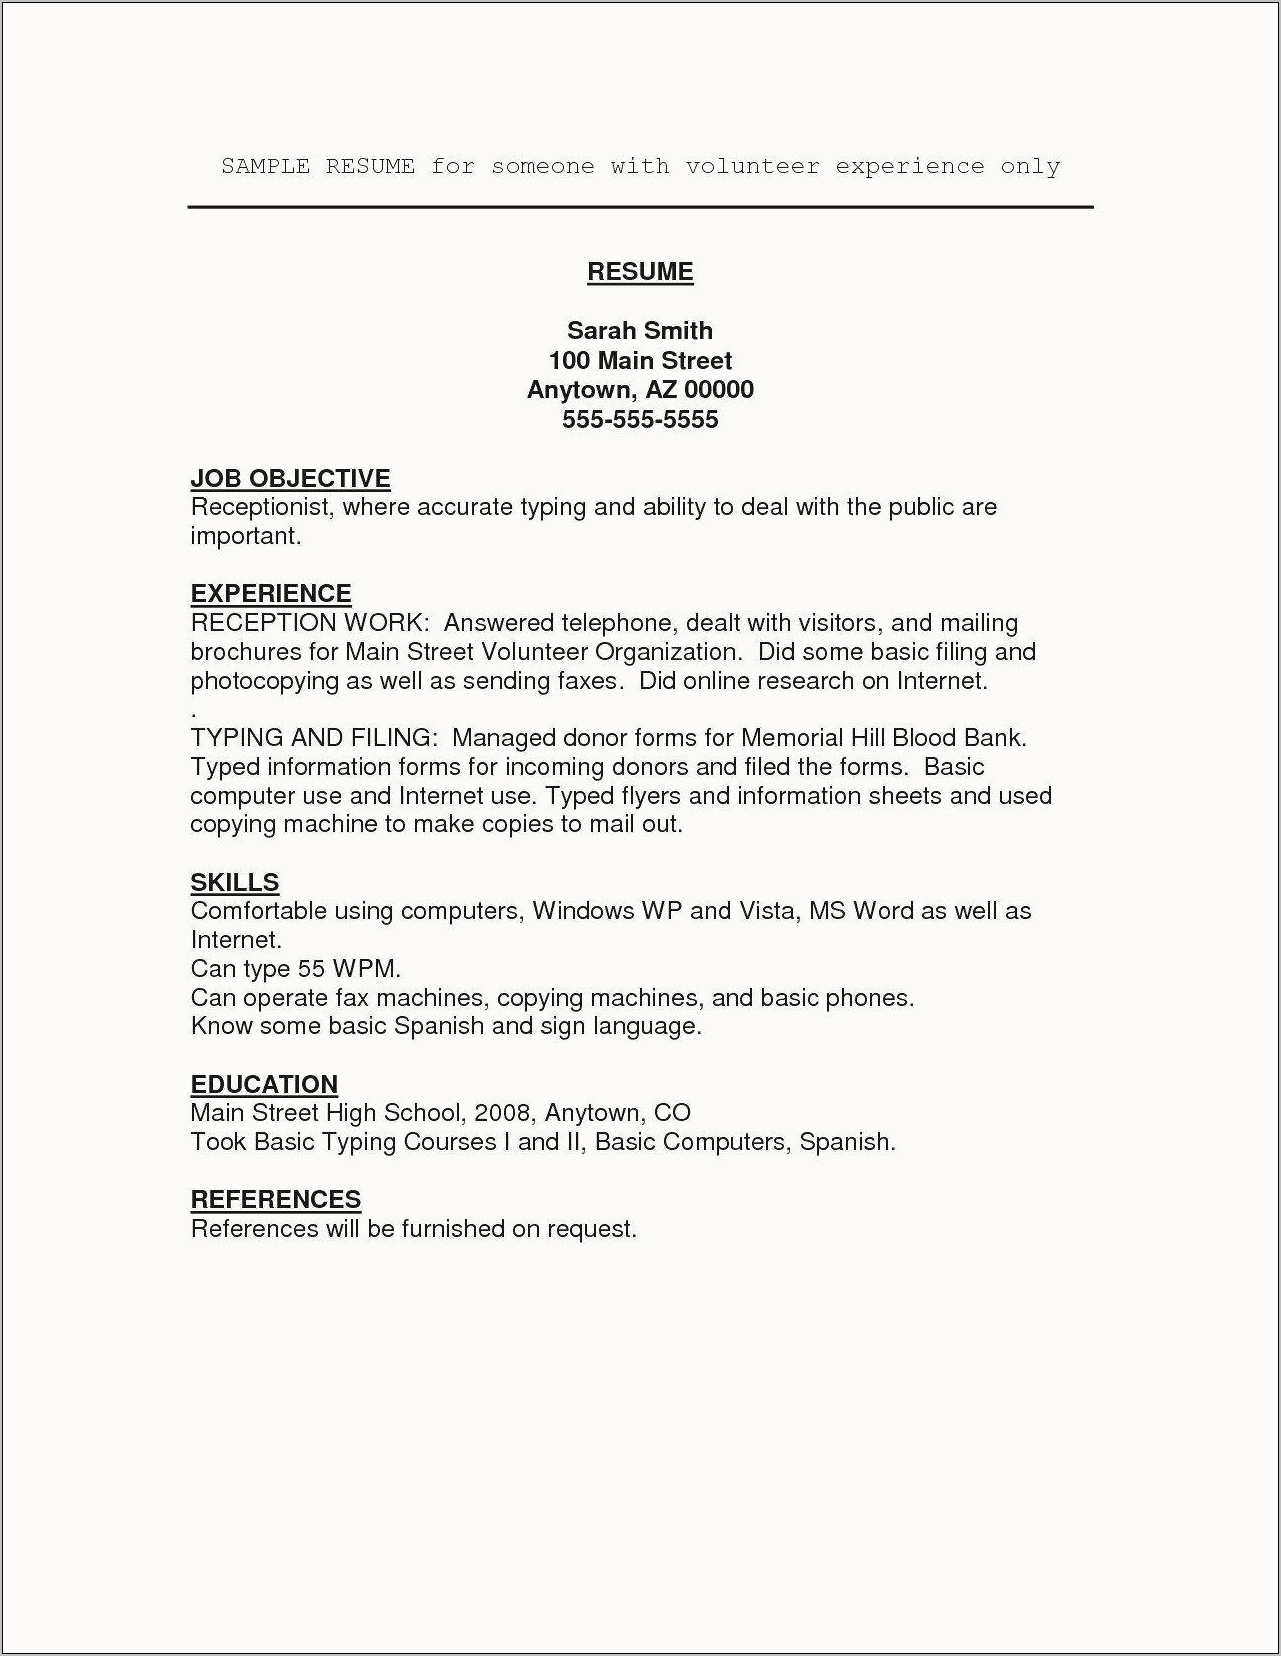 Resume With No Work Or Volunteer Experience